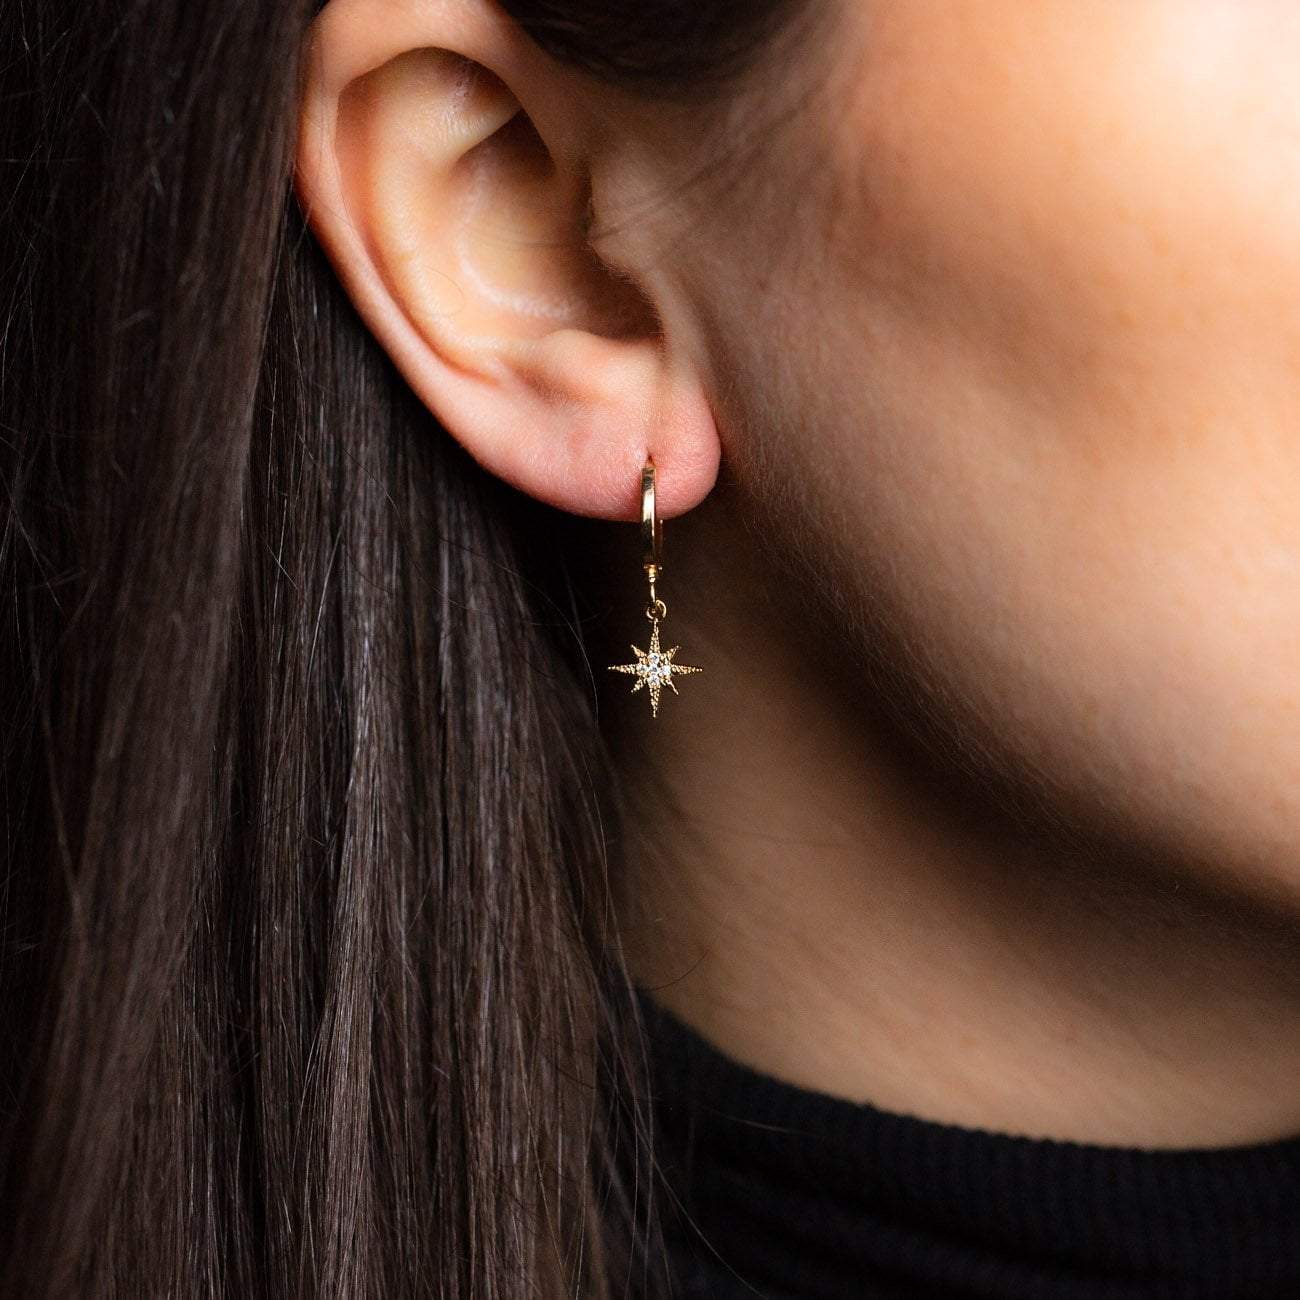 Local Eclectic Gold Star and Moon Hoop Earrings on Ear